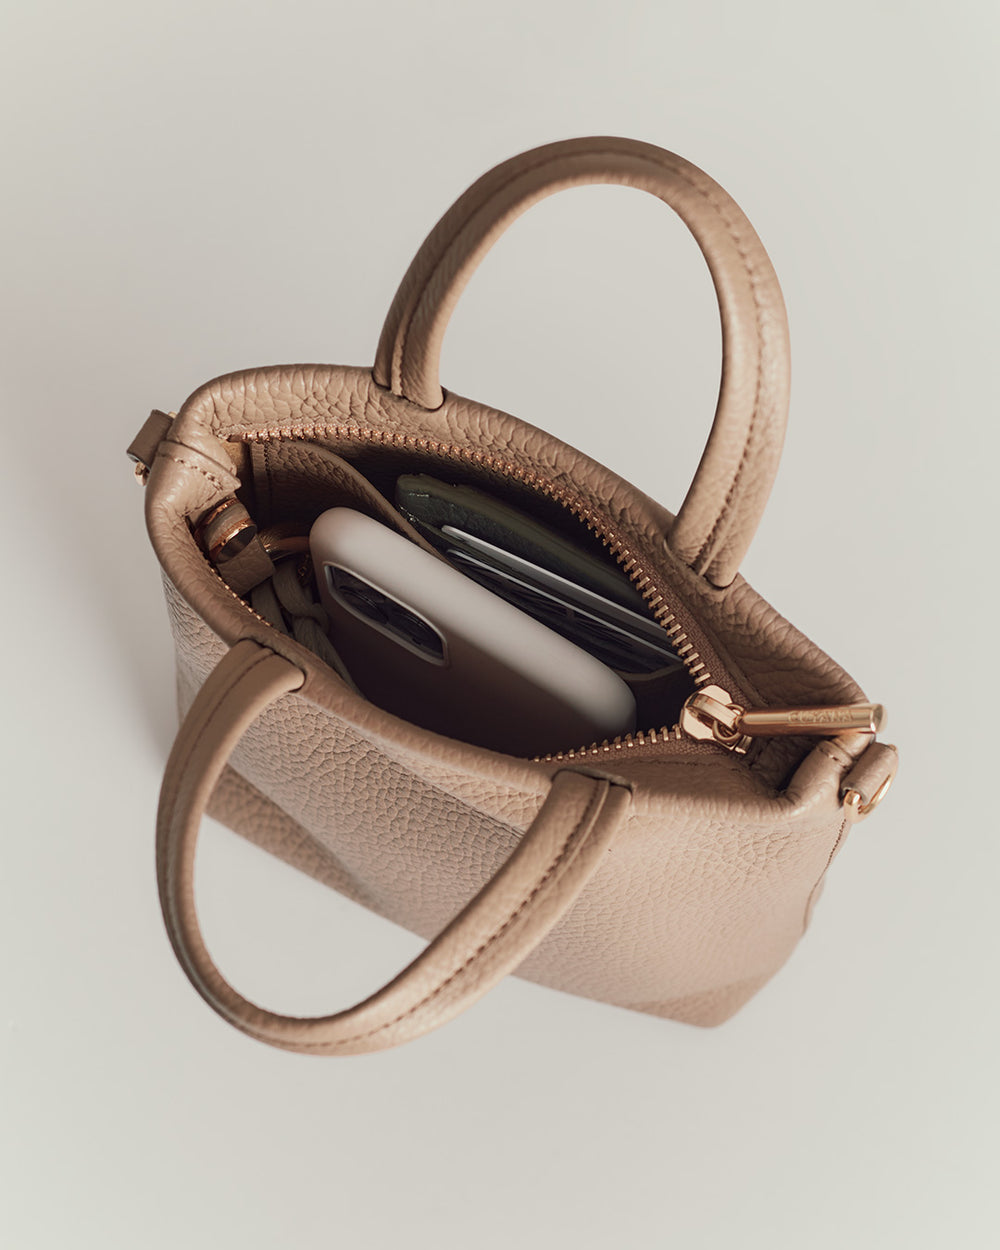 Handbag with a cellphone and wallet inside